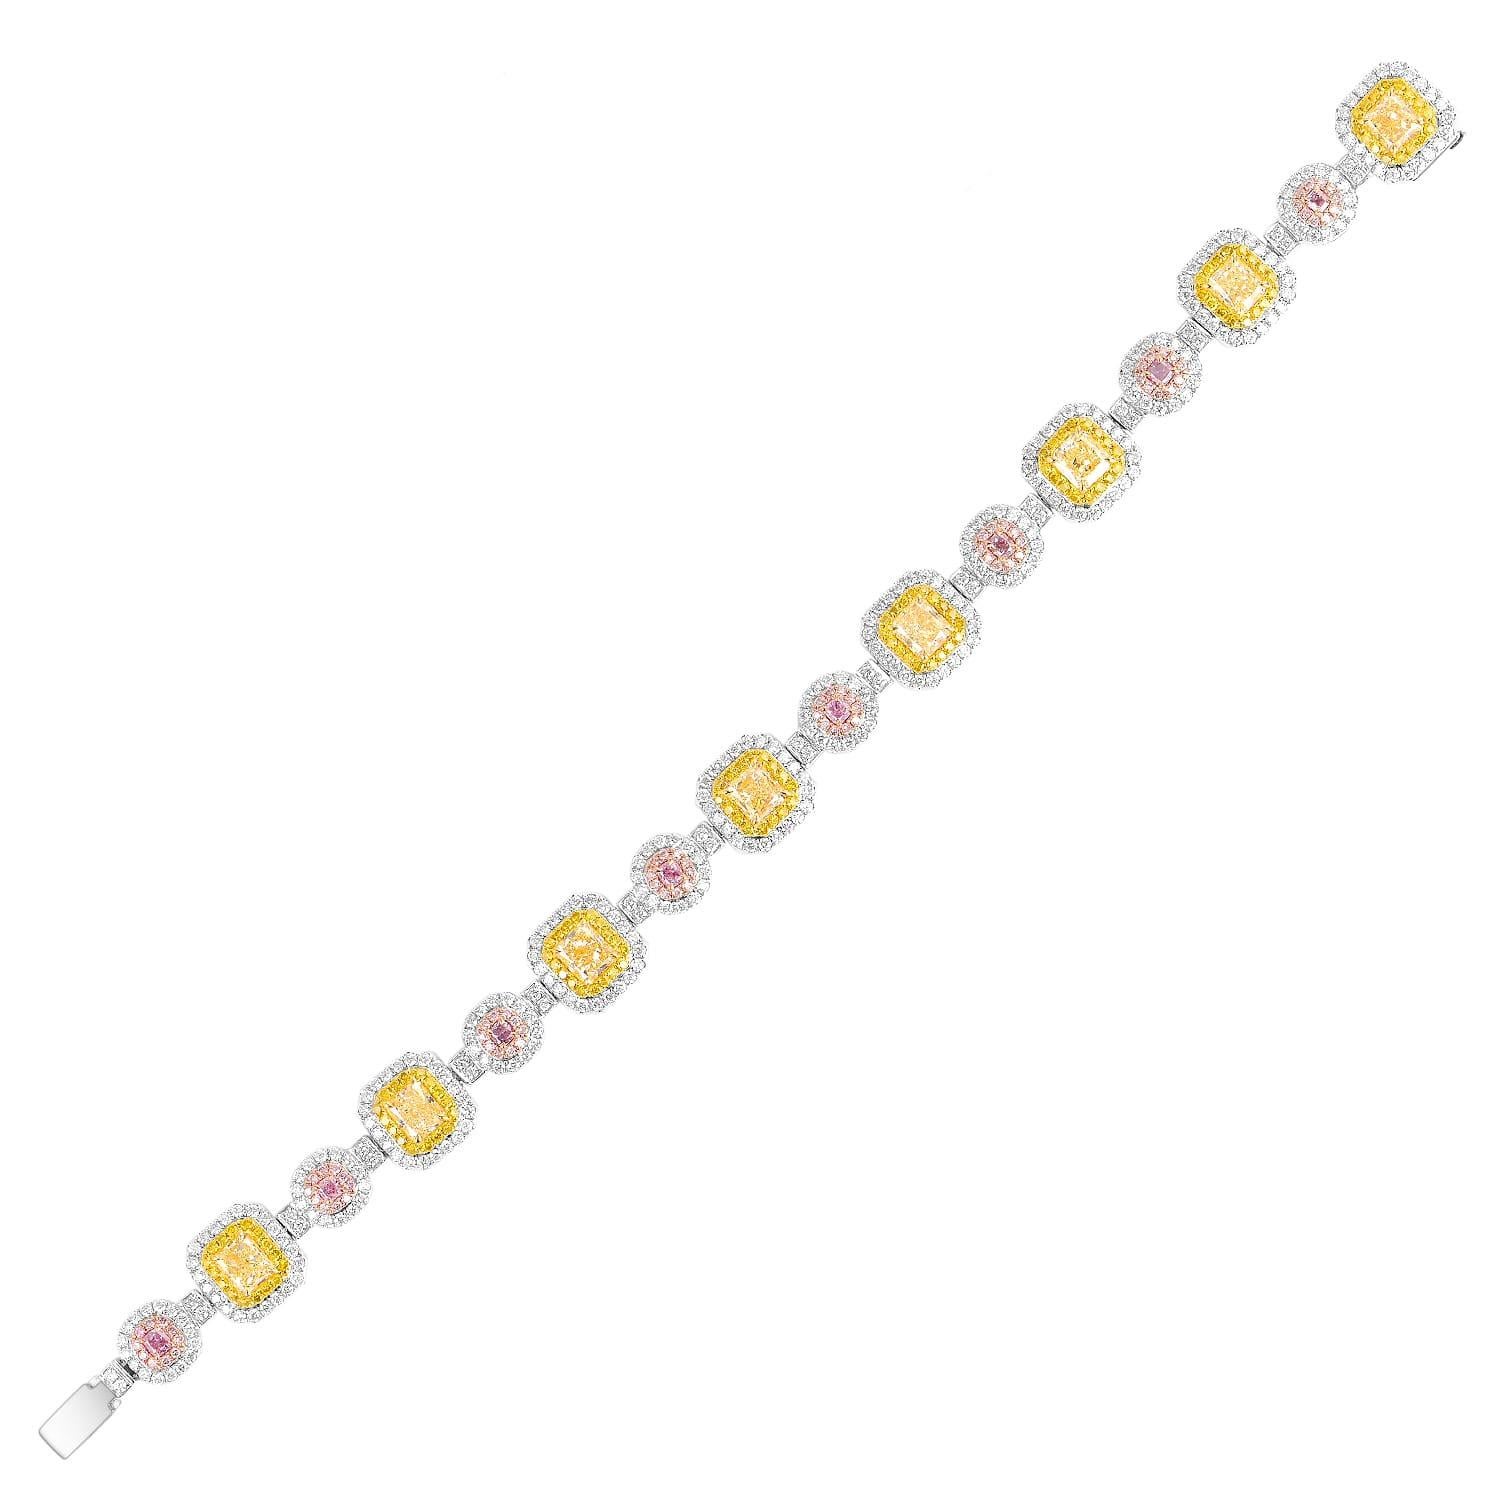 Material: 18k White Gold
Radiant Diamond Details: Approximately 5.64ctw of Radiant cut diamonds. Diamonds are Fancy Yellow in color and VS in clarity
Cushion Diamond Details: Approximately 0.57ctw of Cushion cut diamonds. Diamonds are Fancy Pink in